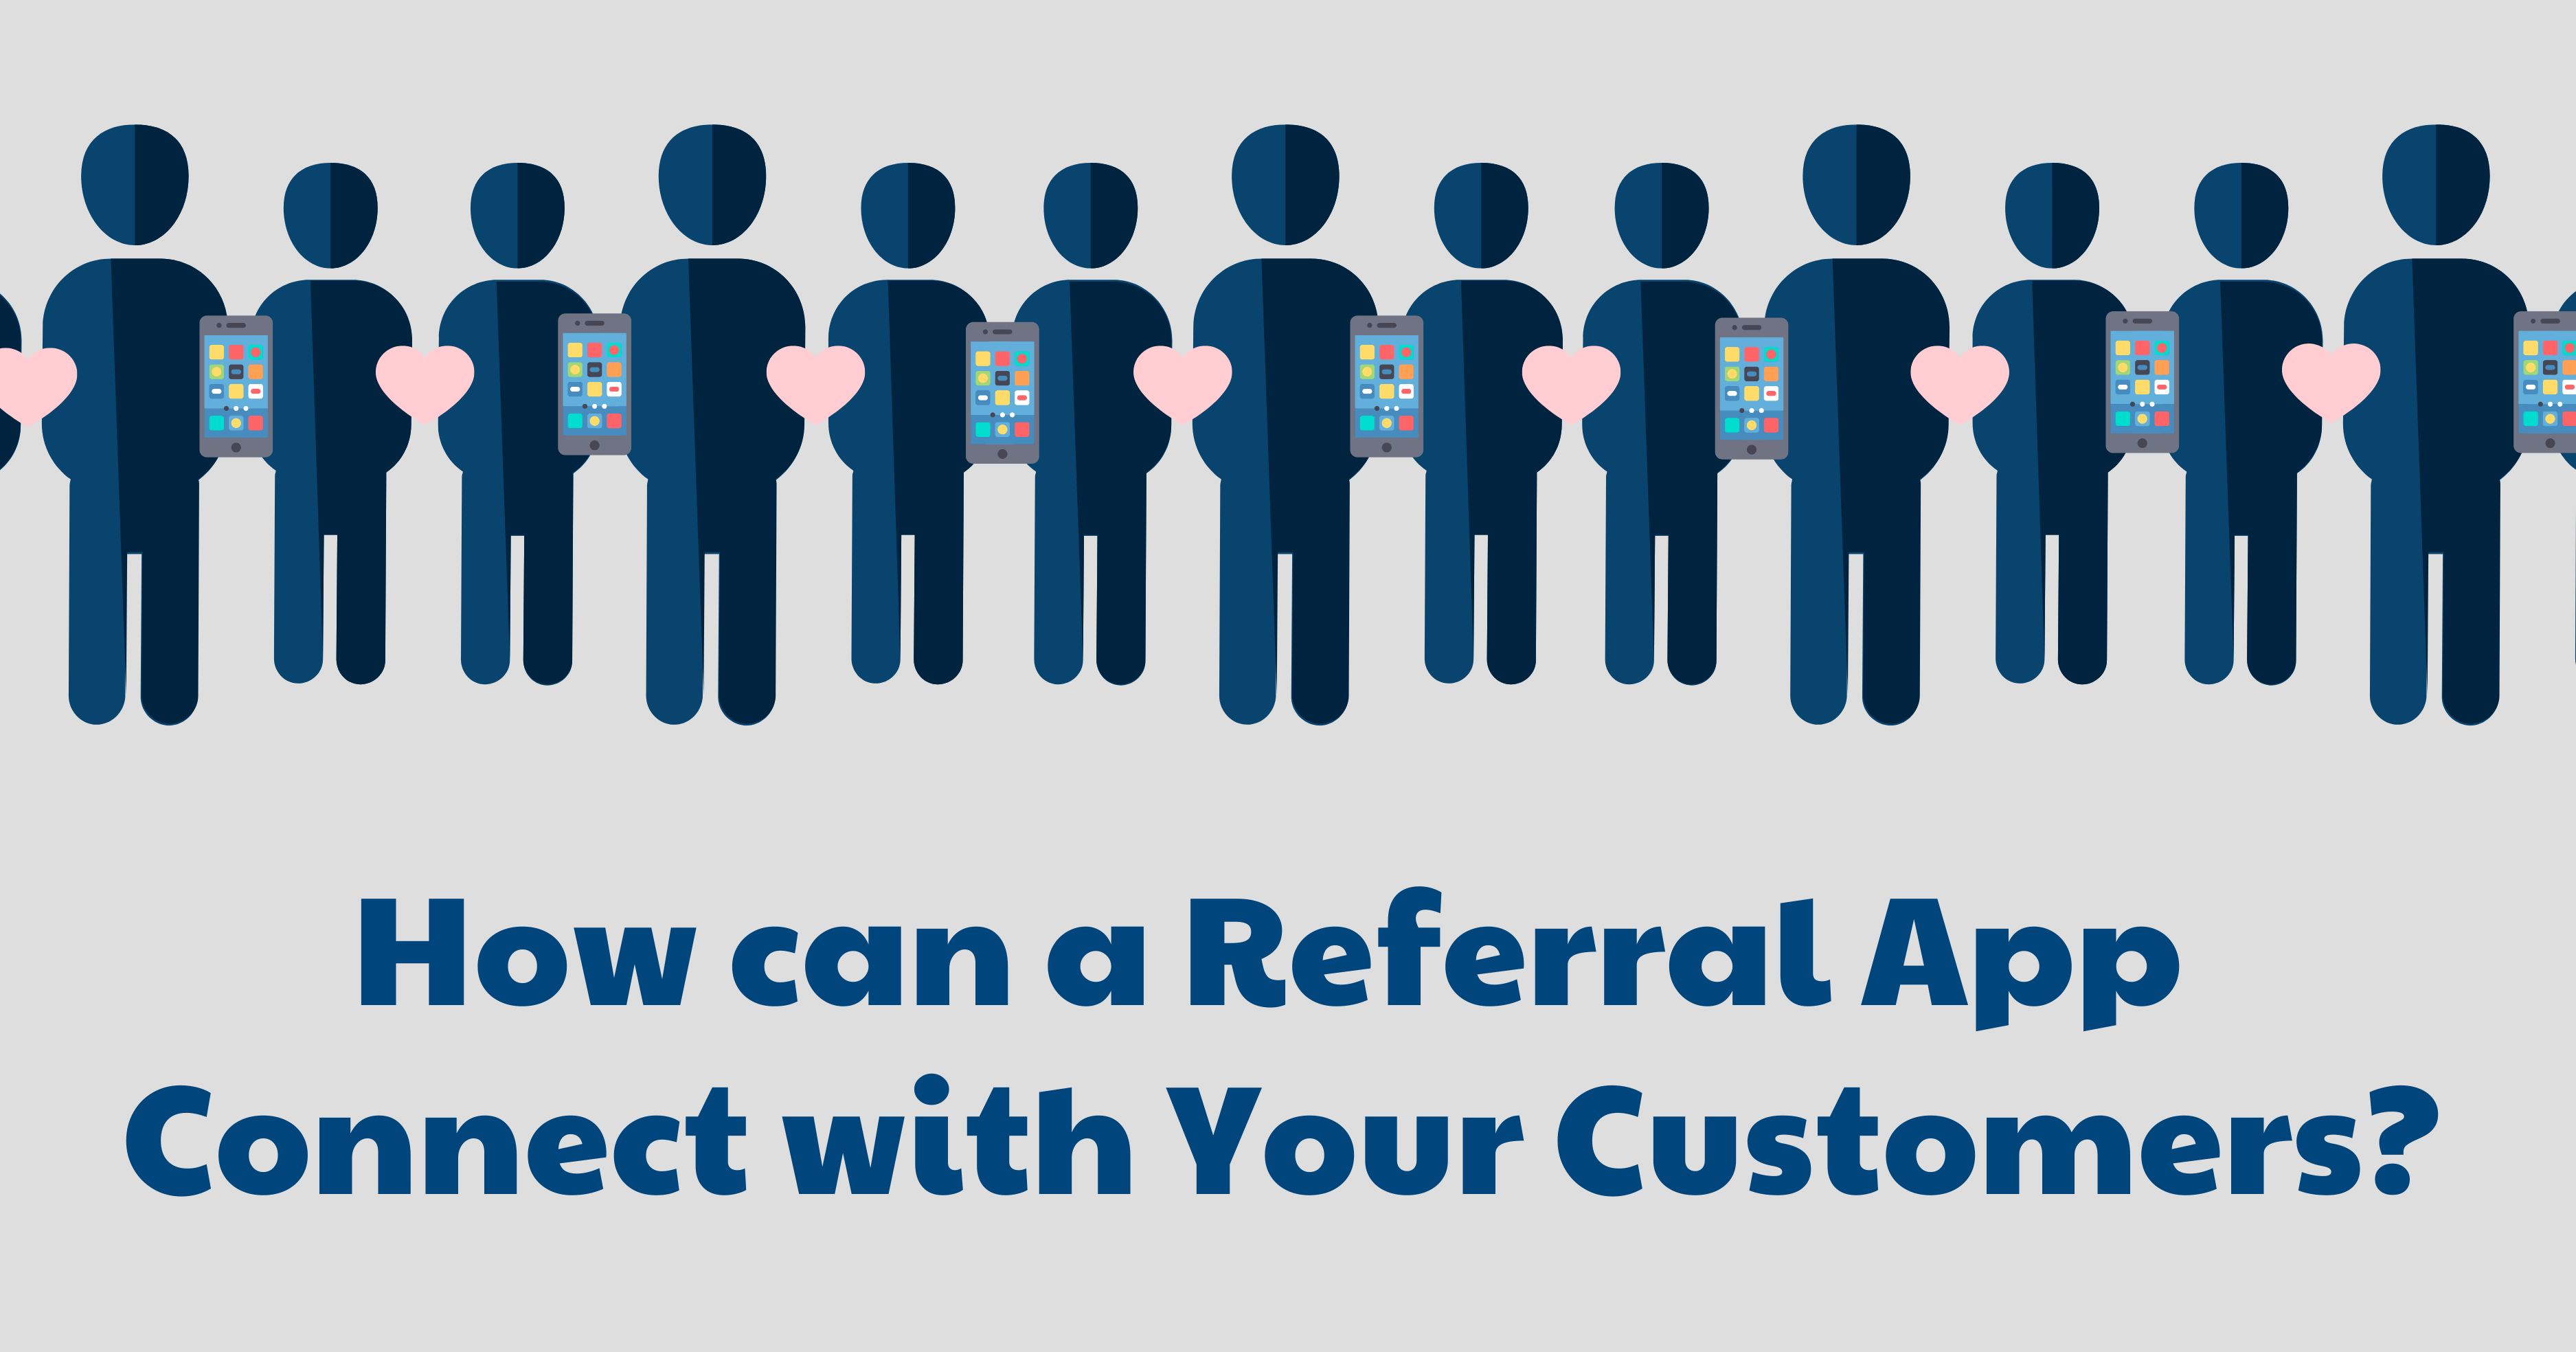 How can a Referral App Connect with Your Customers?